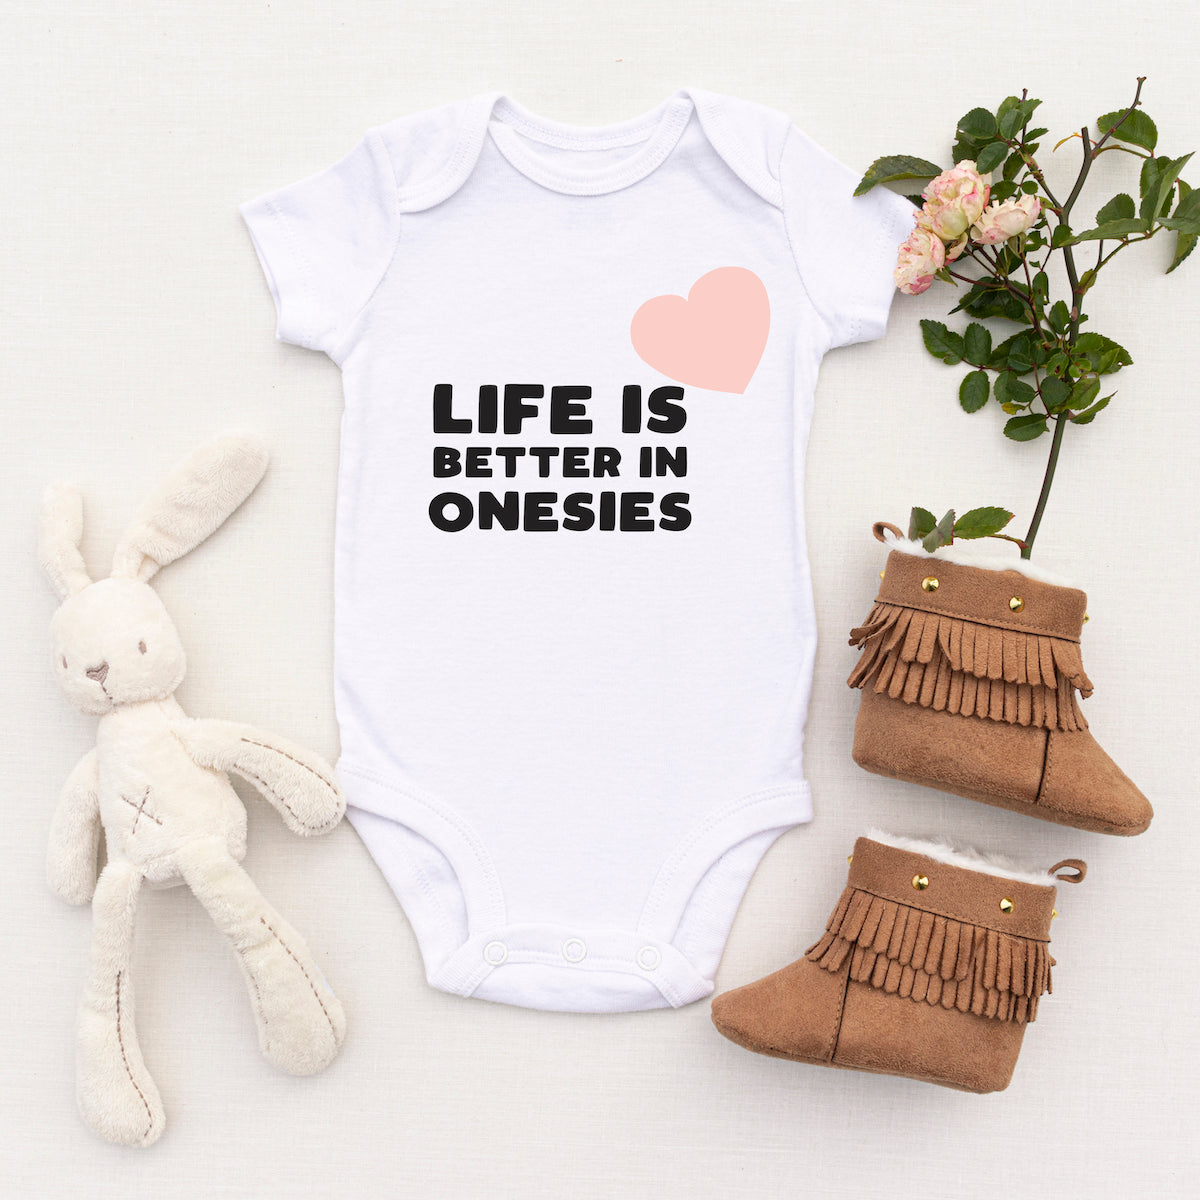 Personalised White Baby Body Suit Grow Vest - Perfect Gift